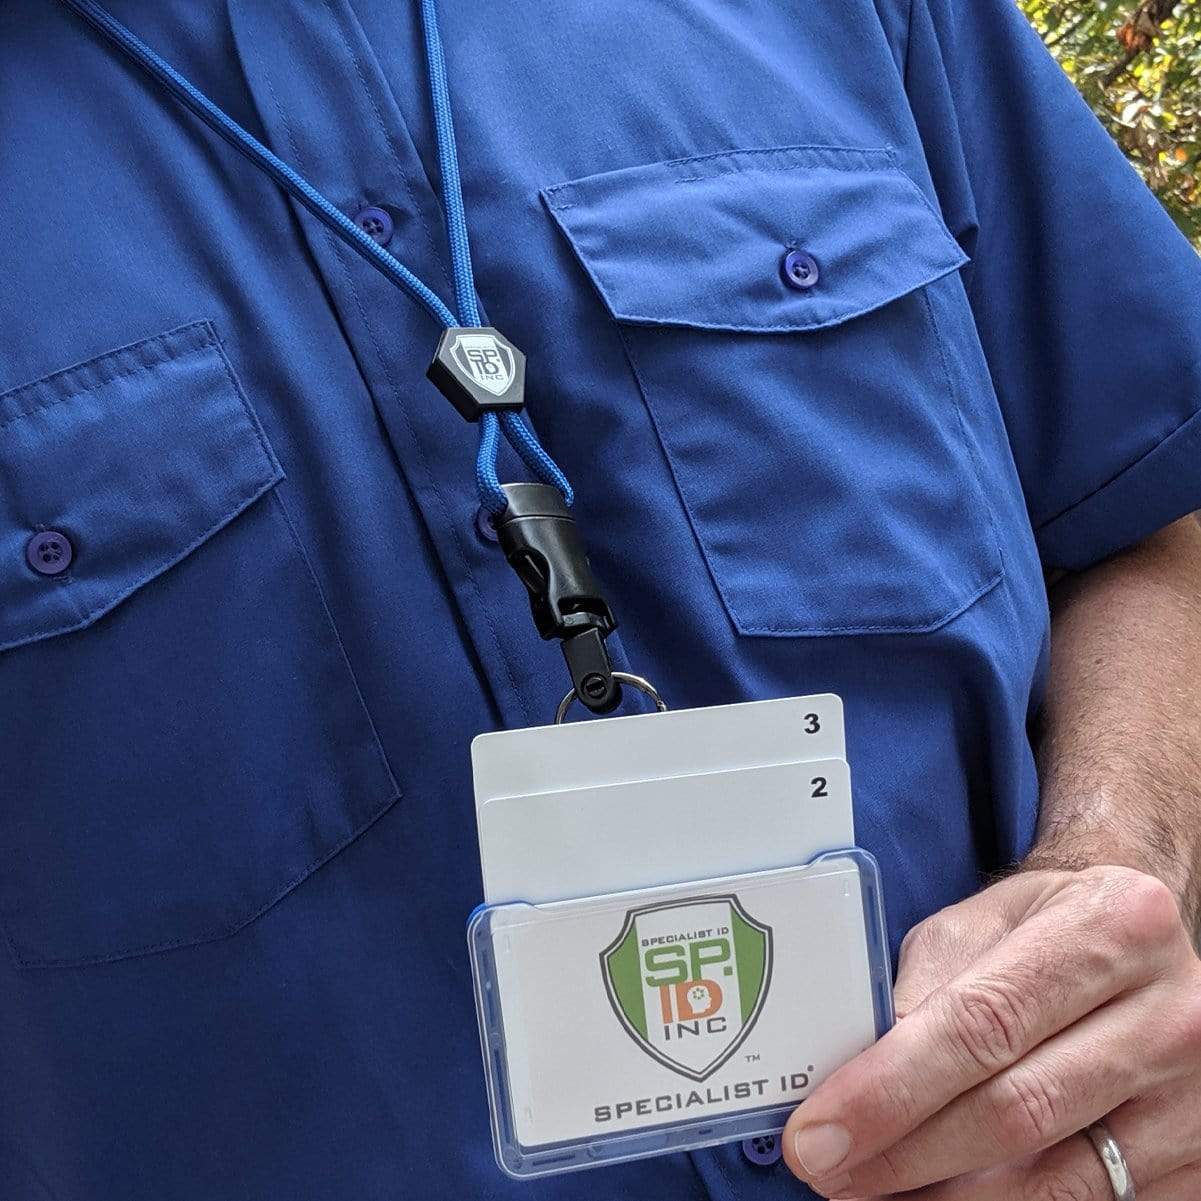 A person wearing professional work wear, a blue shirt with two chest pockets, holds an ID badge on a Specialist ID Horizontal 3 Card Badge Holder & Heavy Duty Lanyard with Breakaway Clip and Key Ring - Hard Plastic Rigid Name Tag Protector - Top Load for Three Badges around their neck. The badge shows "Specialist ID Inc." and the individual has a stack of cards labeled 2 and 3.